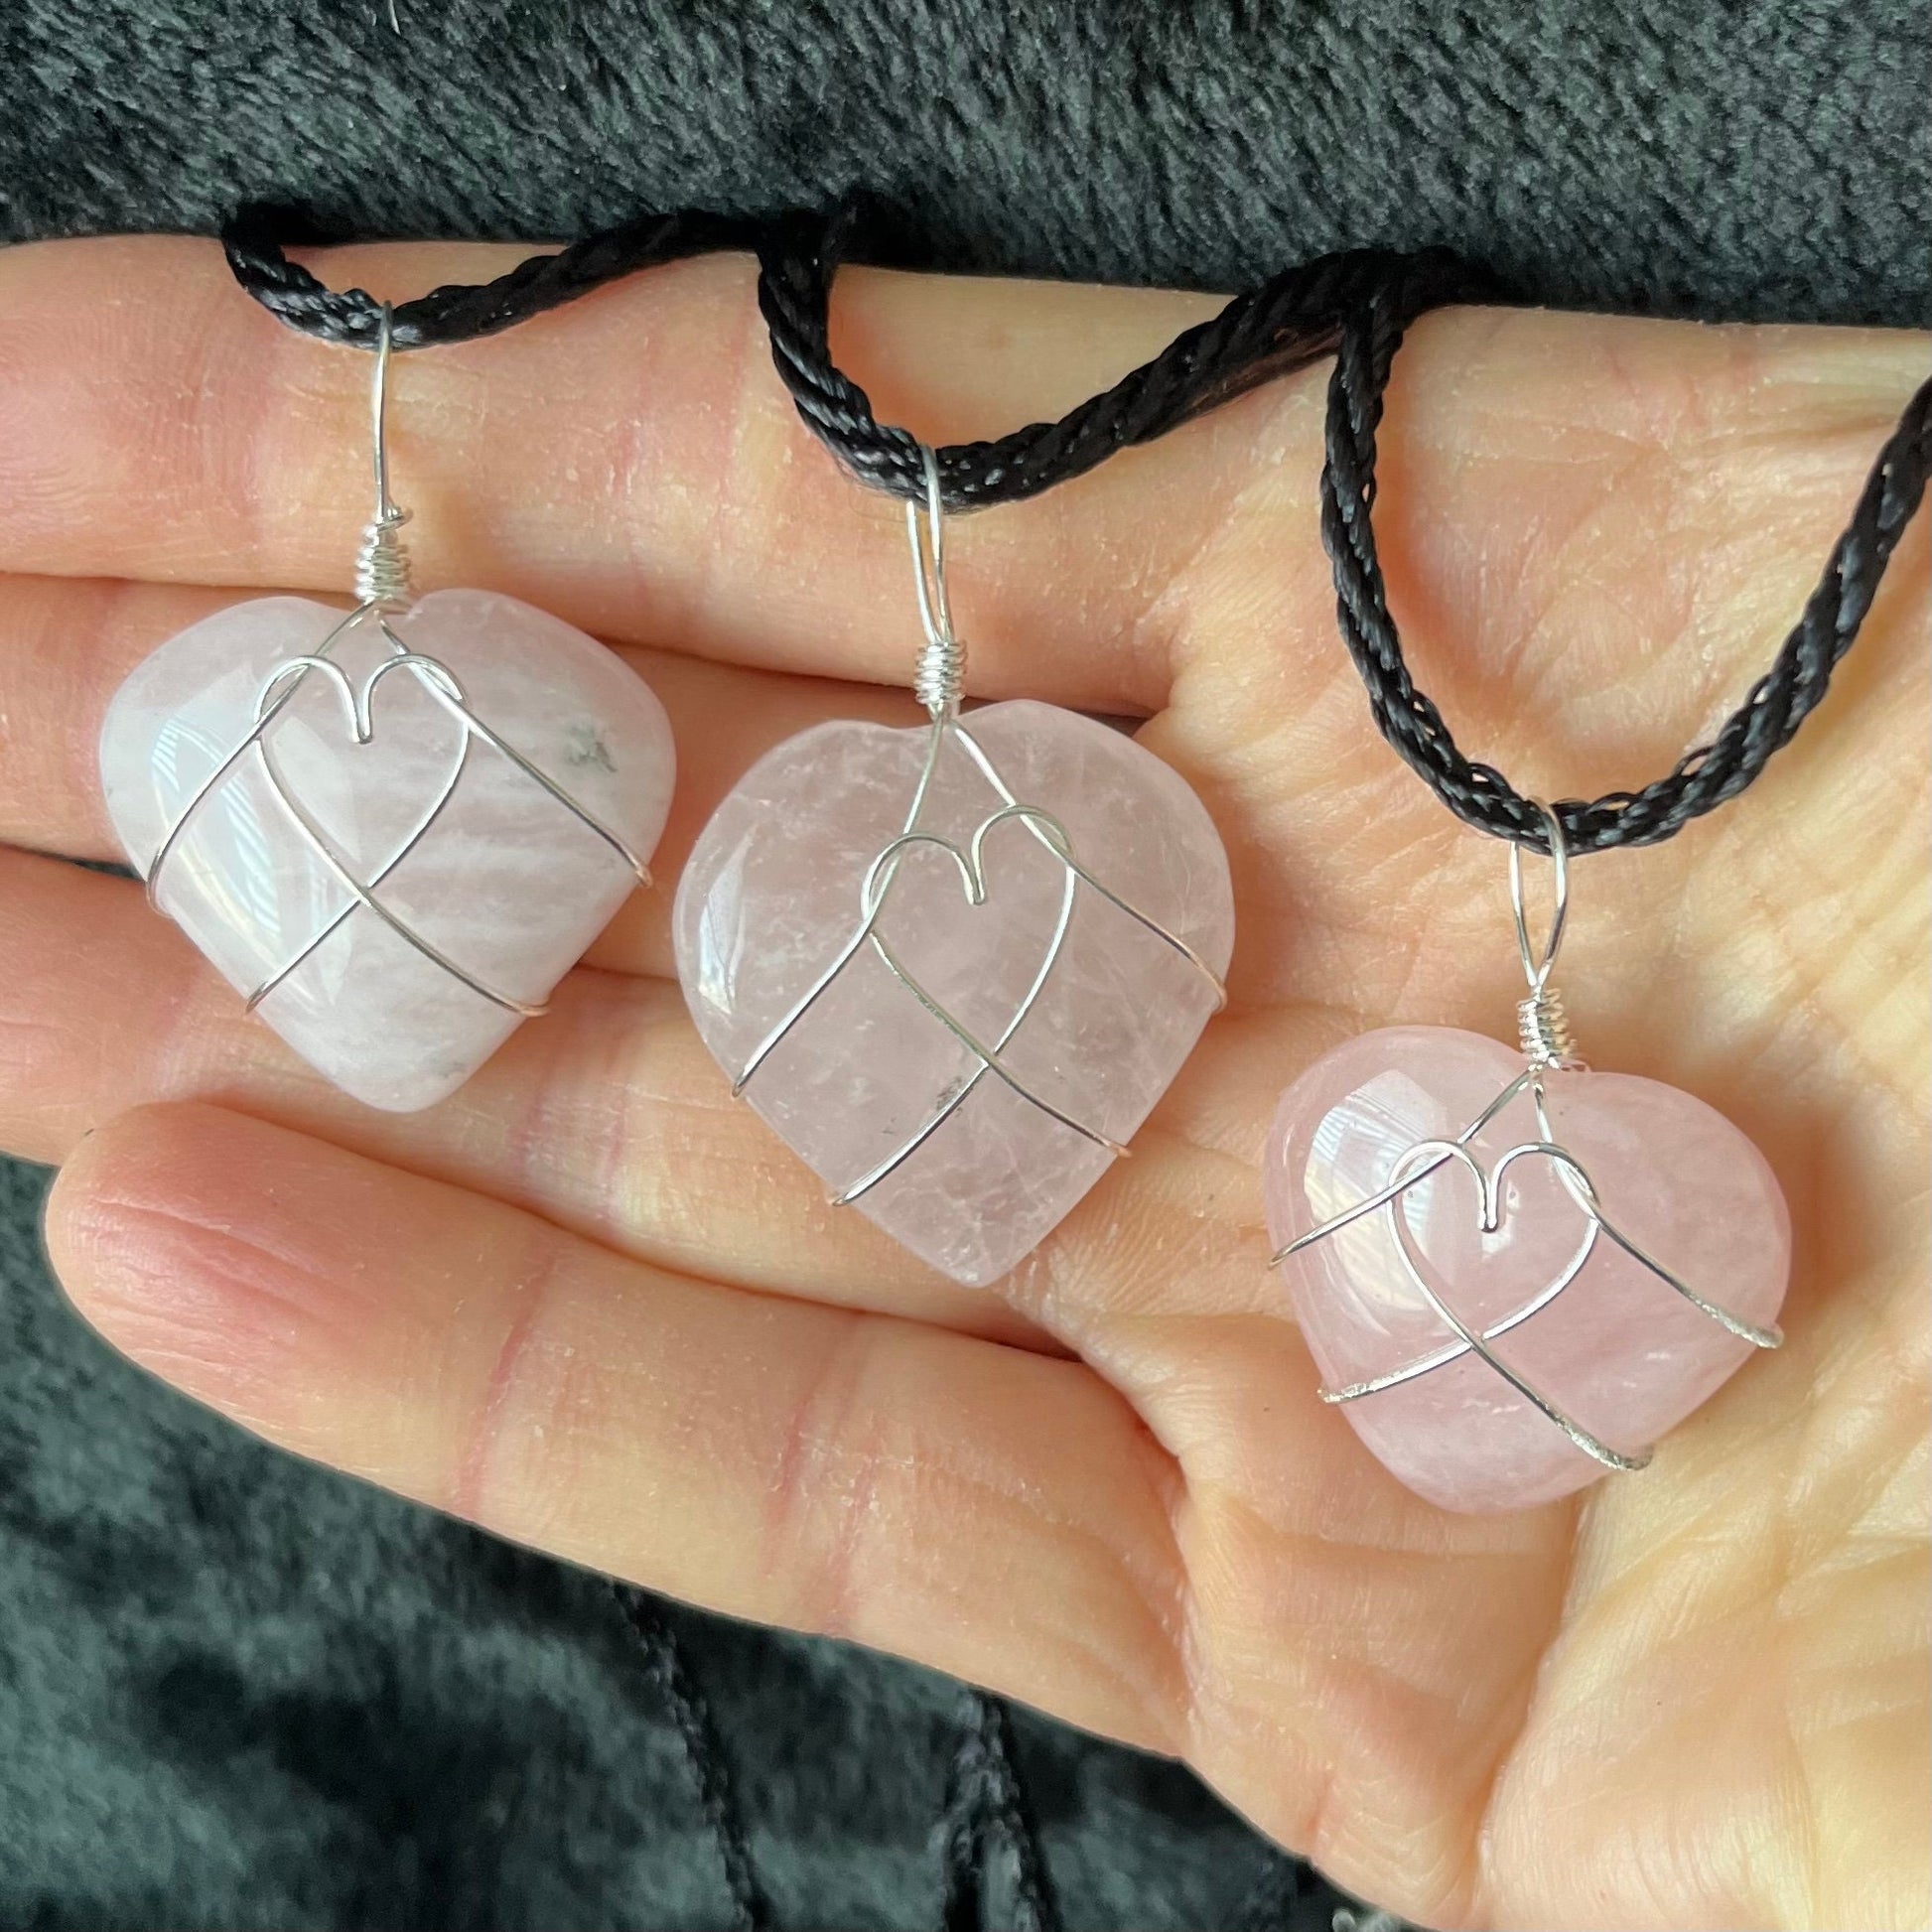 Three Wire-wrapped rose quartz heart necklaces: a silver wire intricately wraps around polished rose quartz heart pendants, hanging on a delicate chain.  The wire makes a heart shape in the middle of the rose quartz hearts.